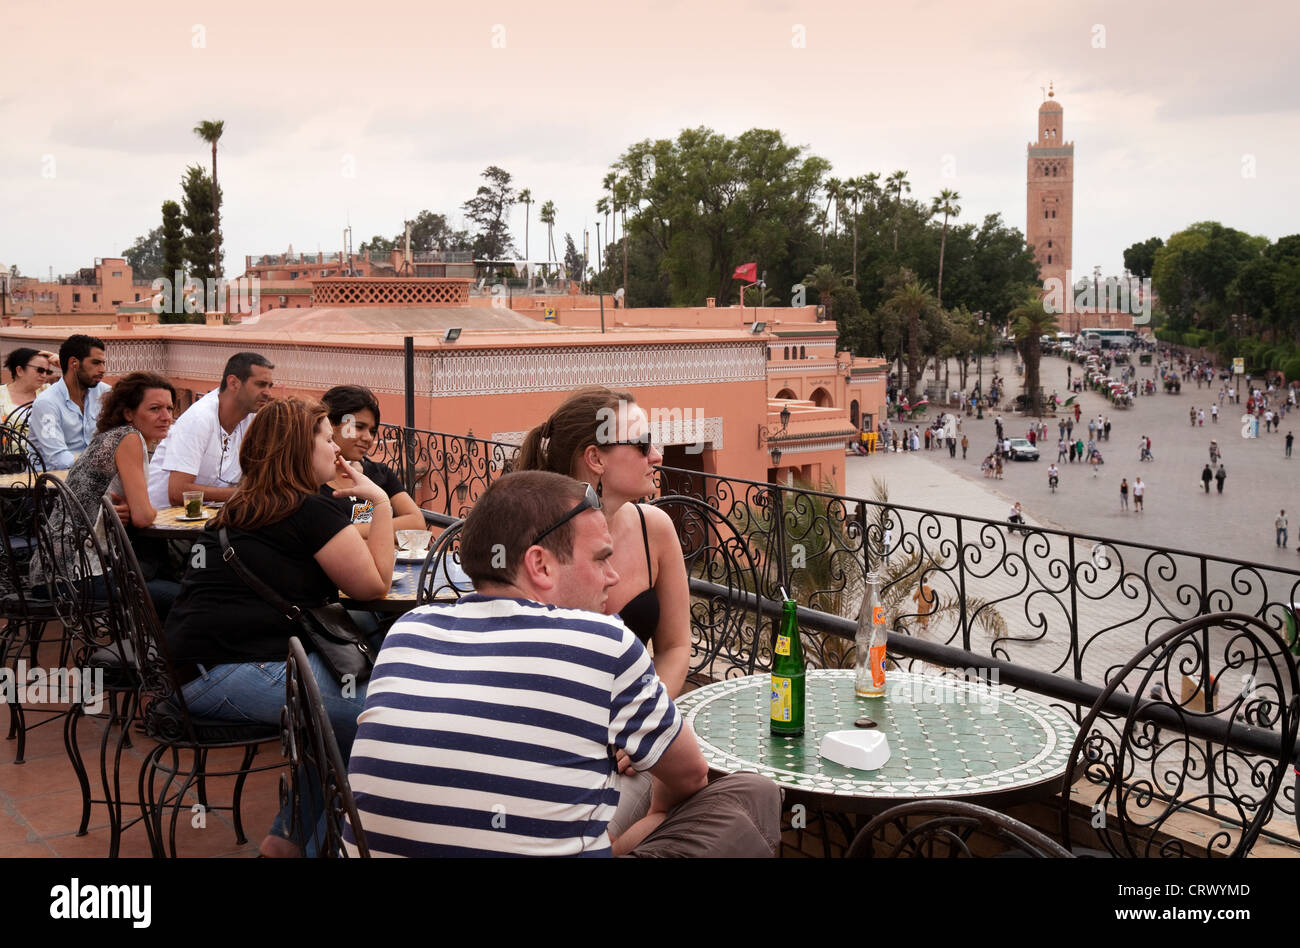 Tourists in Cafe Glacier, looking over Djemaa el Fna Square towards the Koutoubia Mosque, Marrakech Morocco Stock Photo